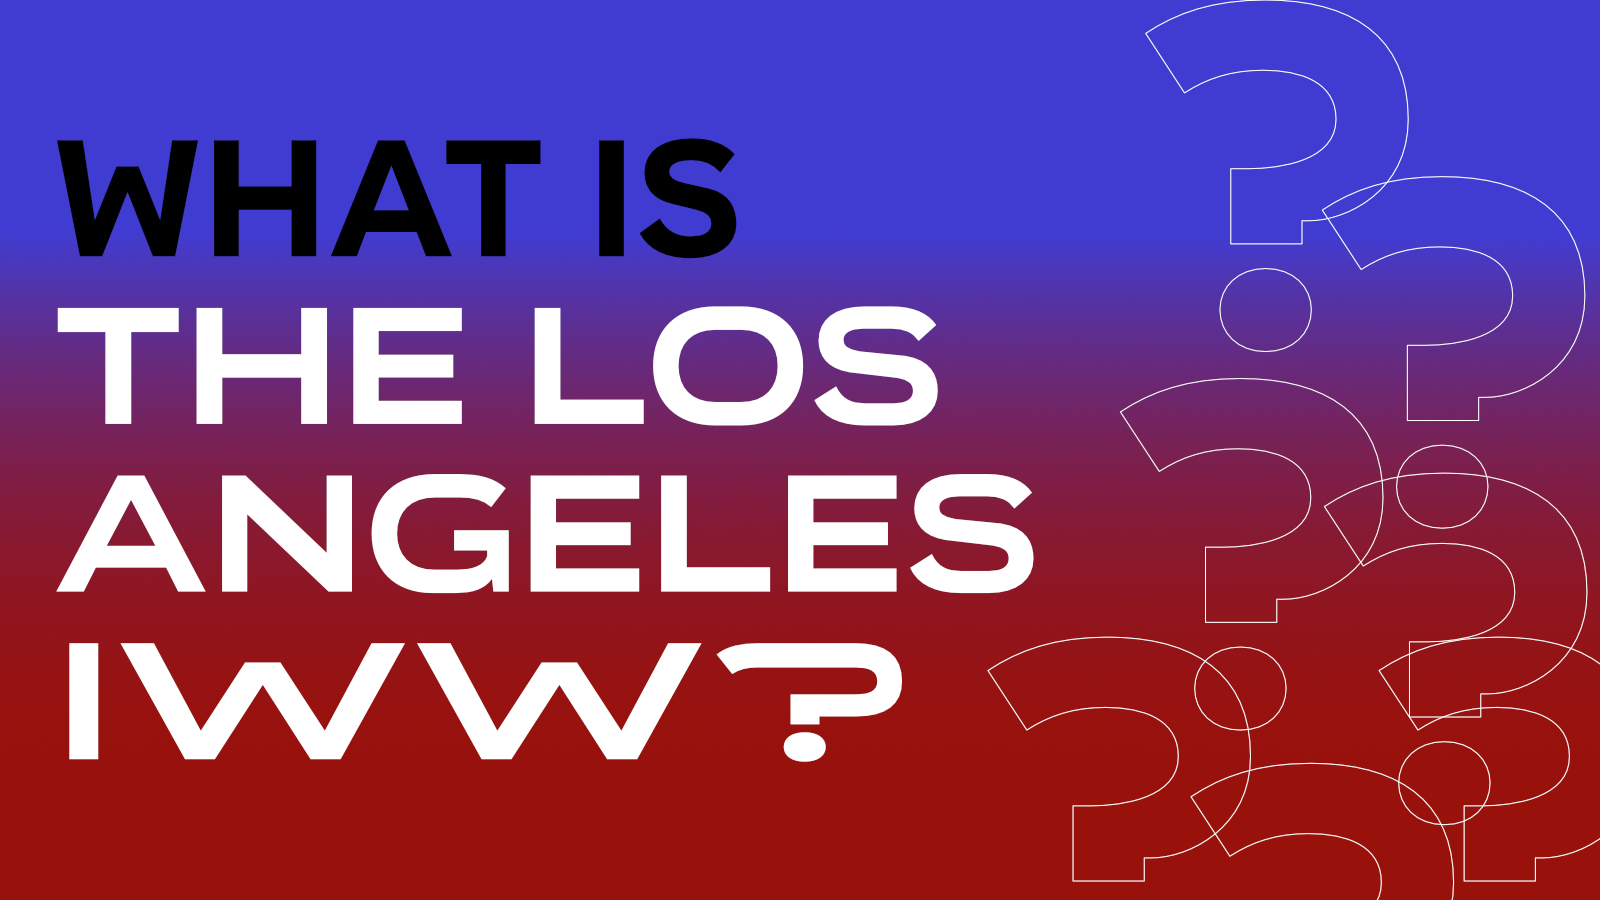 Black and white text reading "About Los Angeles IWW" against a red background